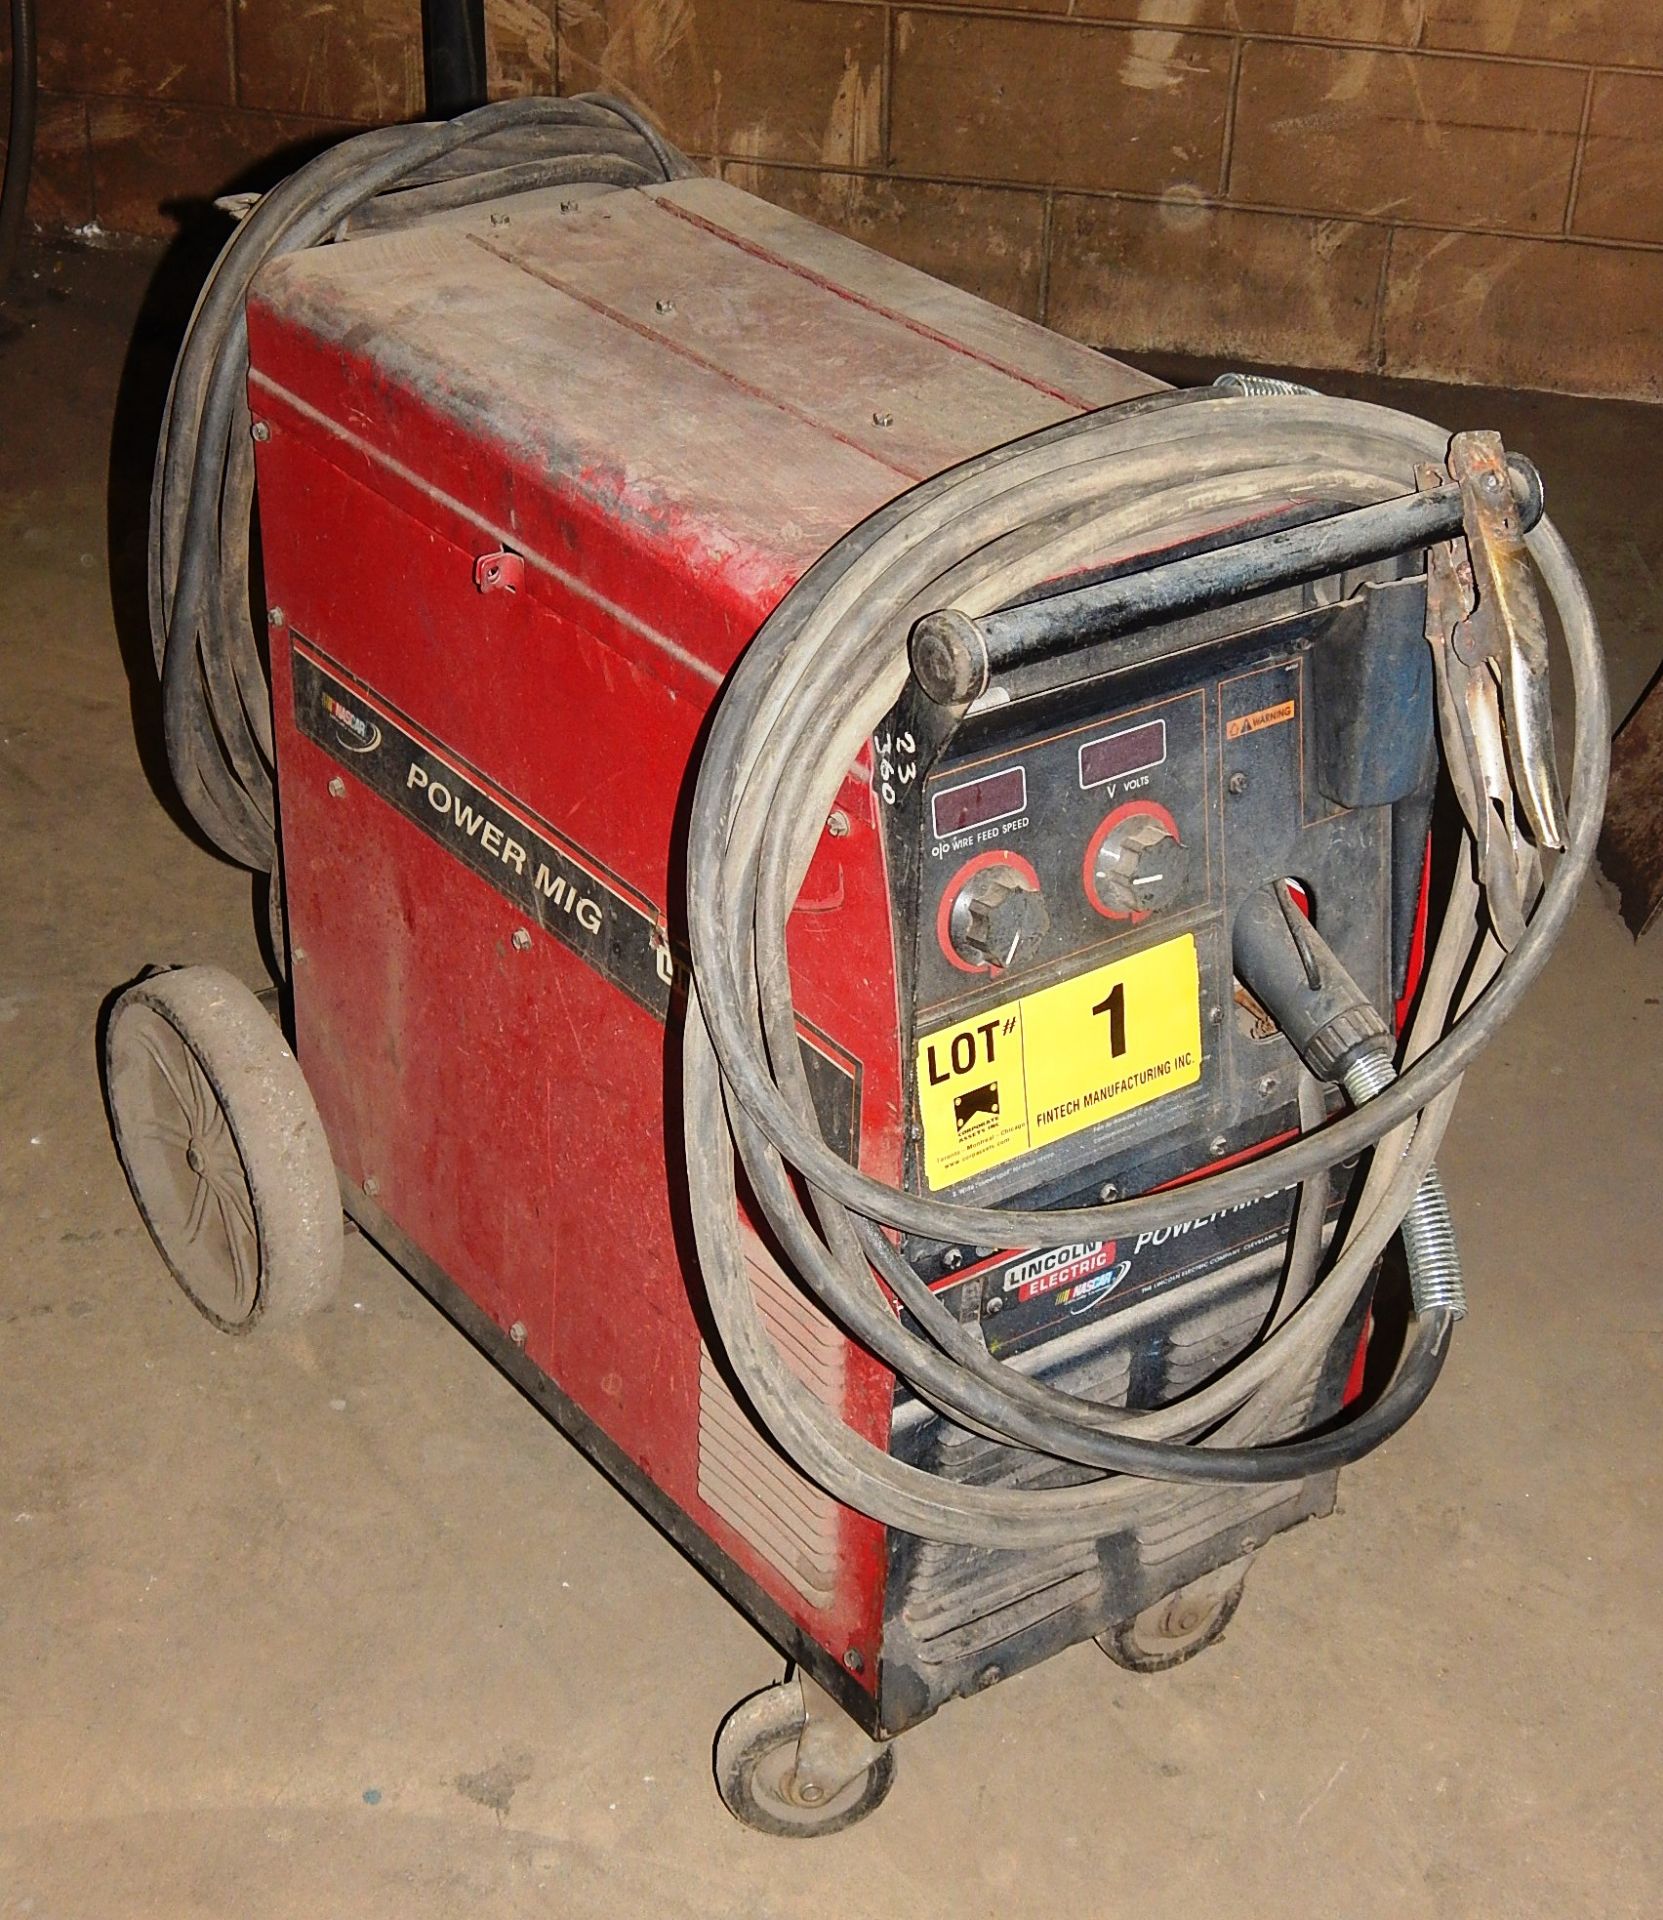 LINCOLN ELECTRIC POWER MIG 255 DIGITAL MIG WELDER WITH CABLES AND GUN S/N: K1693-1